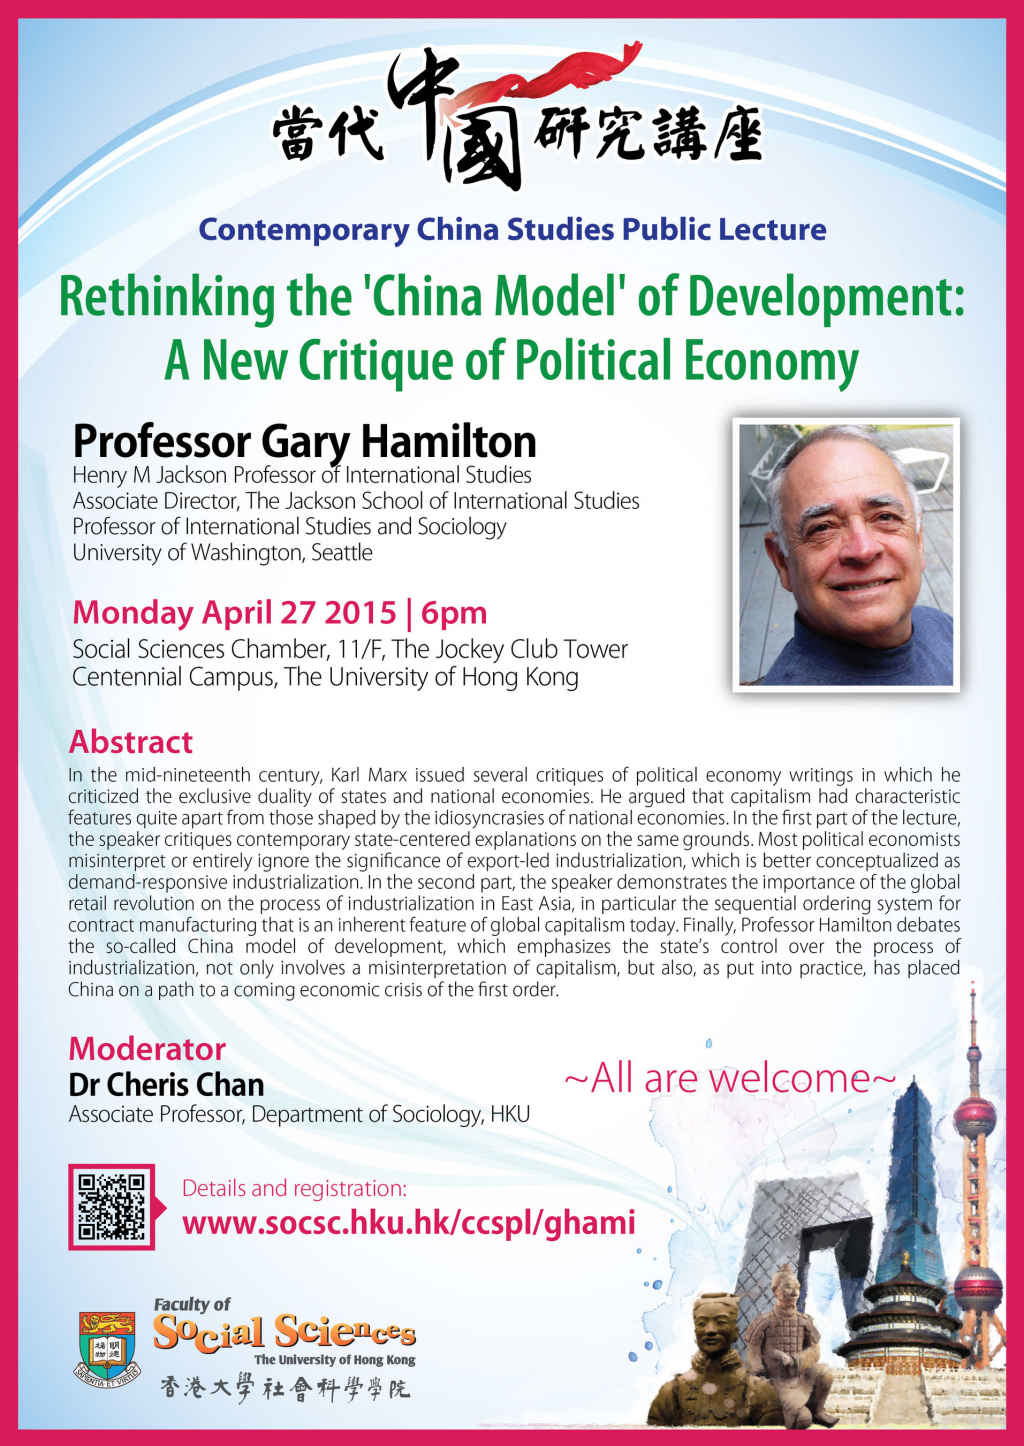 Rethinking the 'China Model' of Development: A New Critique of Political Economy